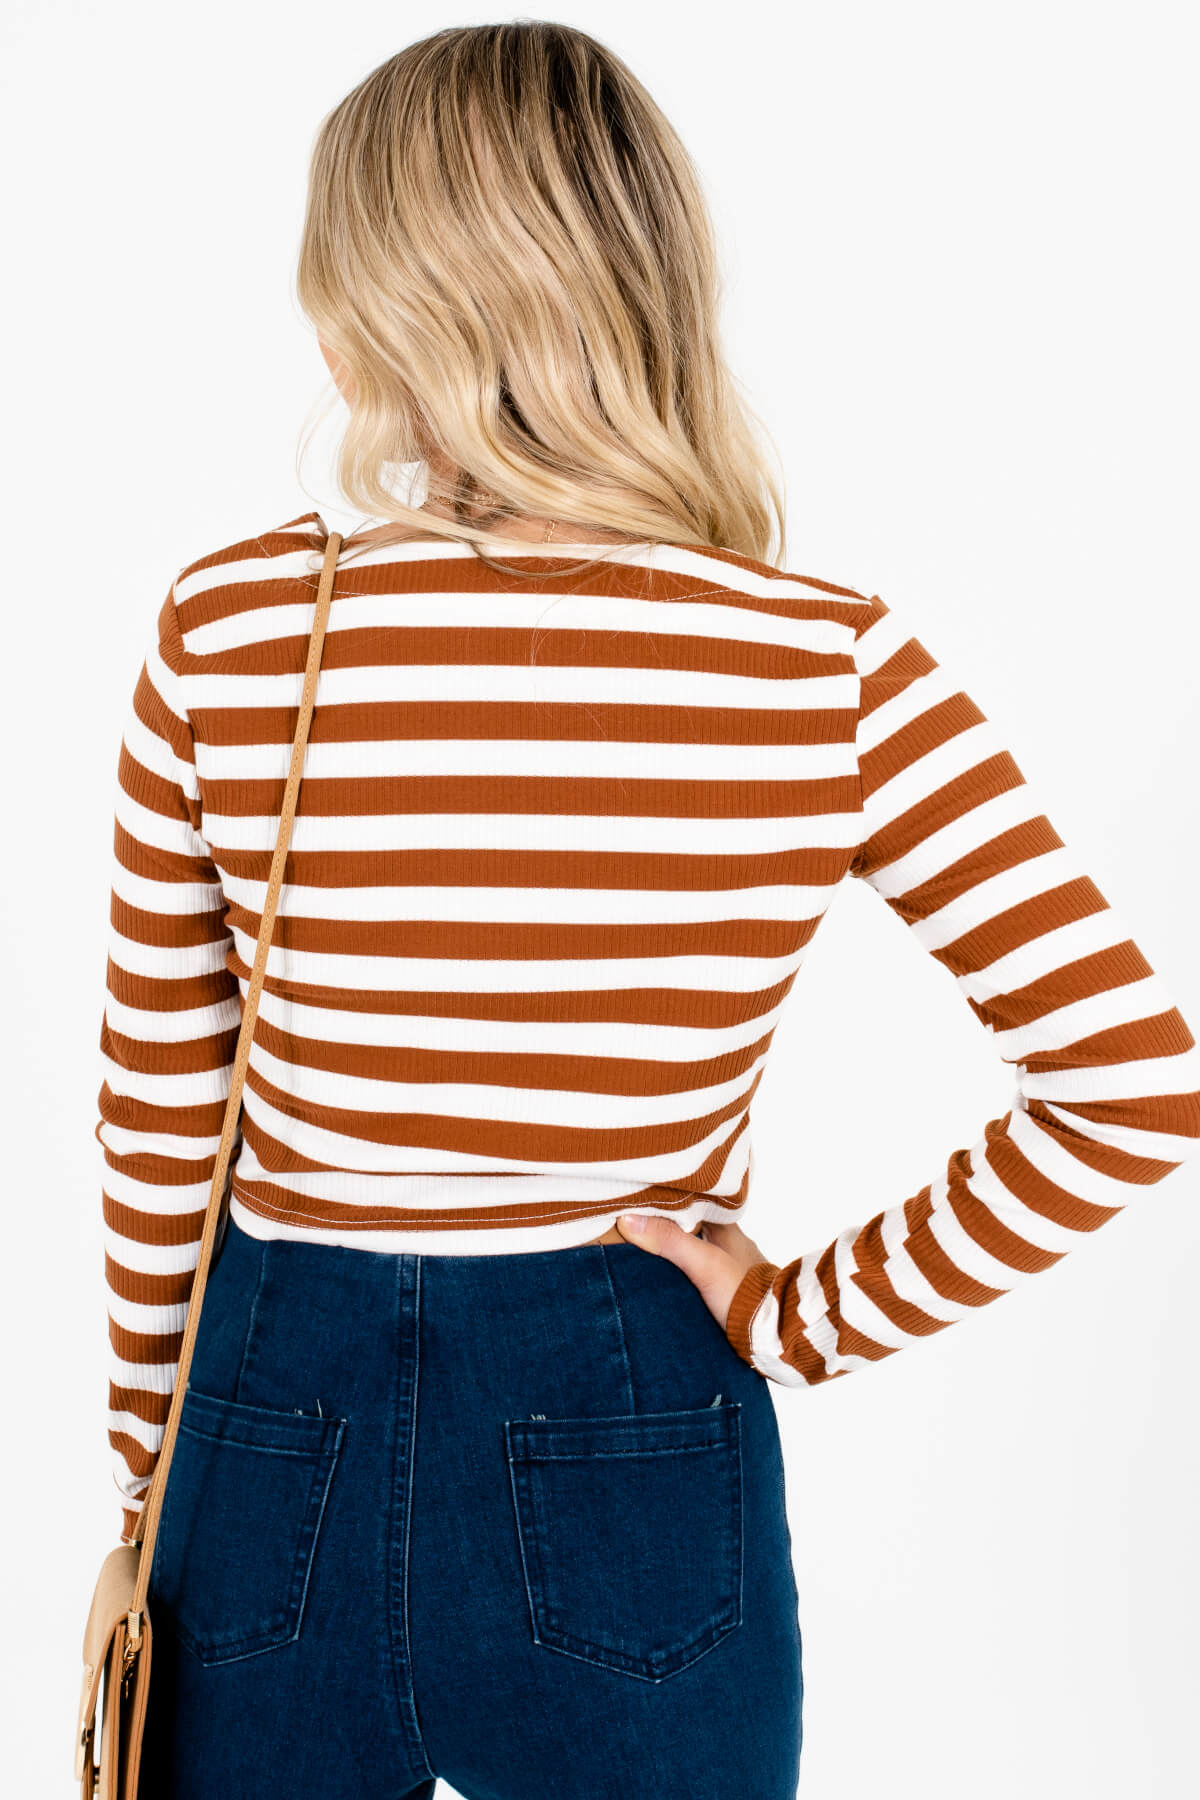 Women’s Rust Brown Ribbed Material Boutique Crop Tops